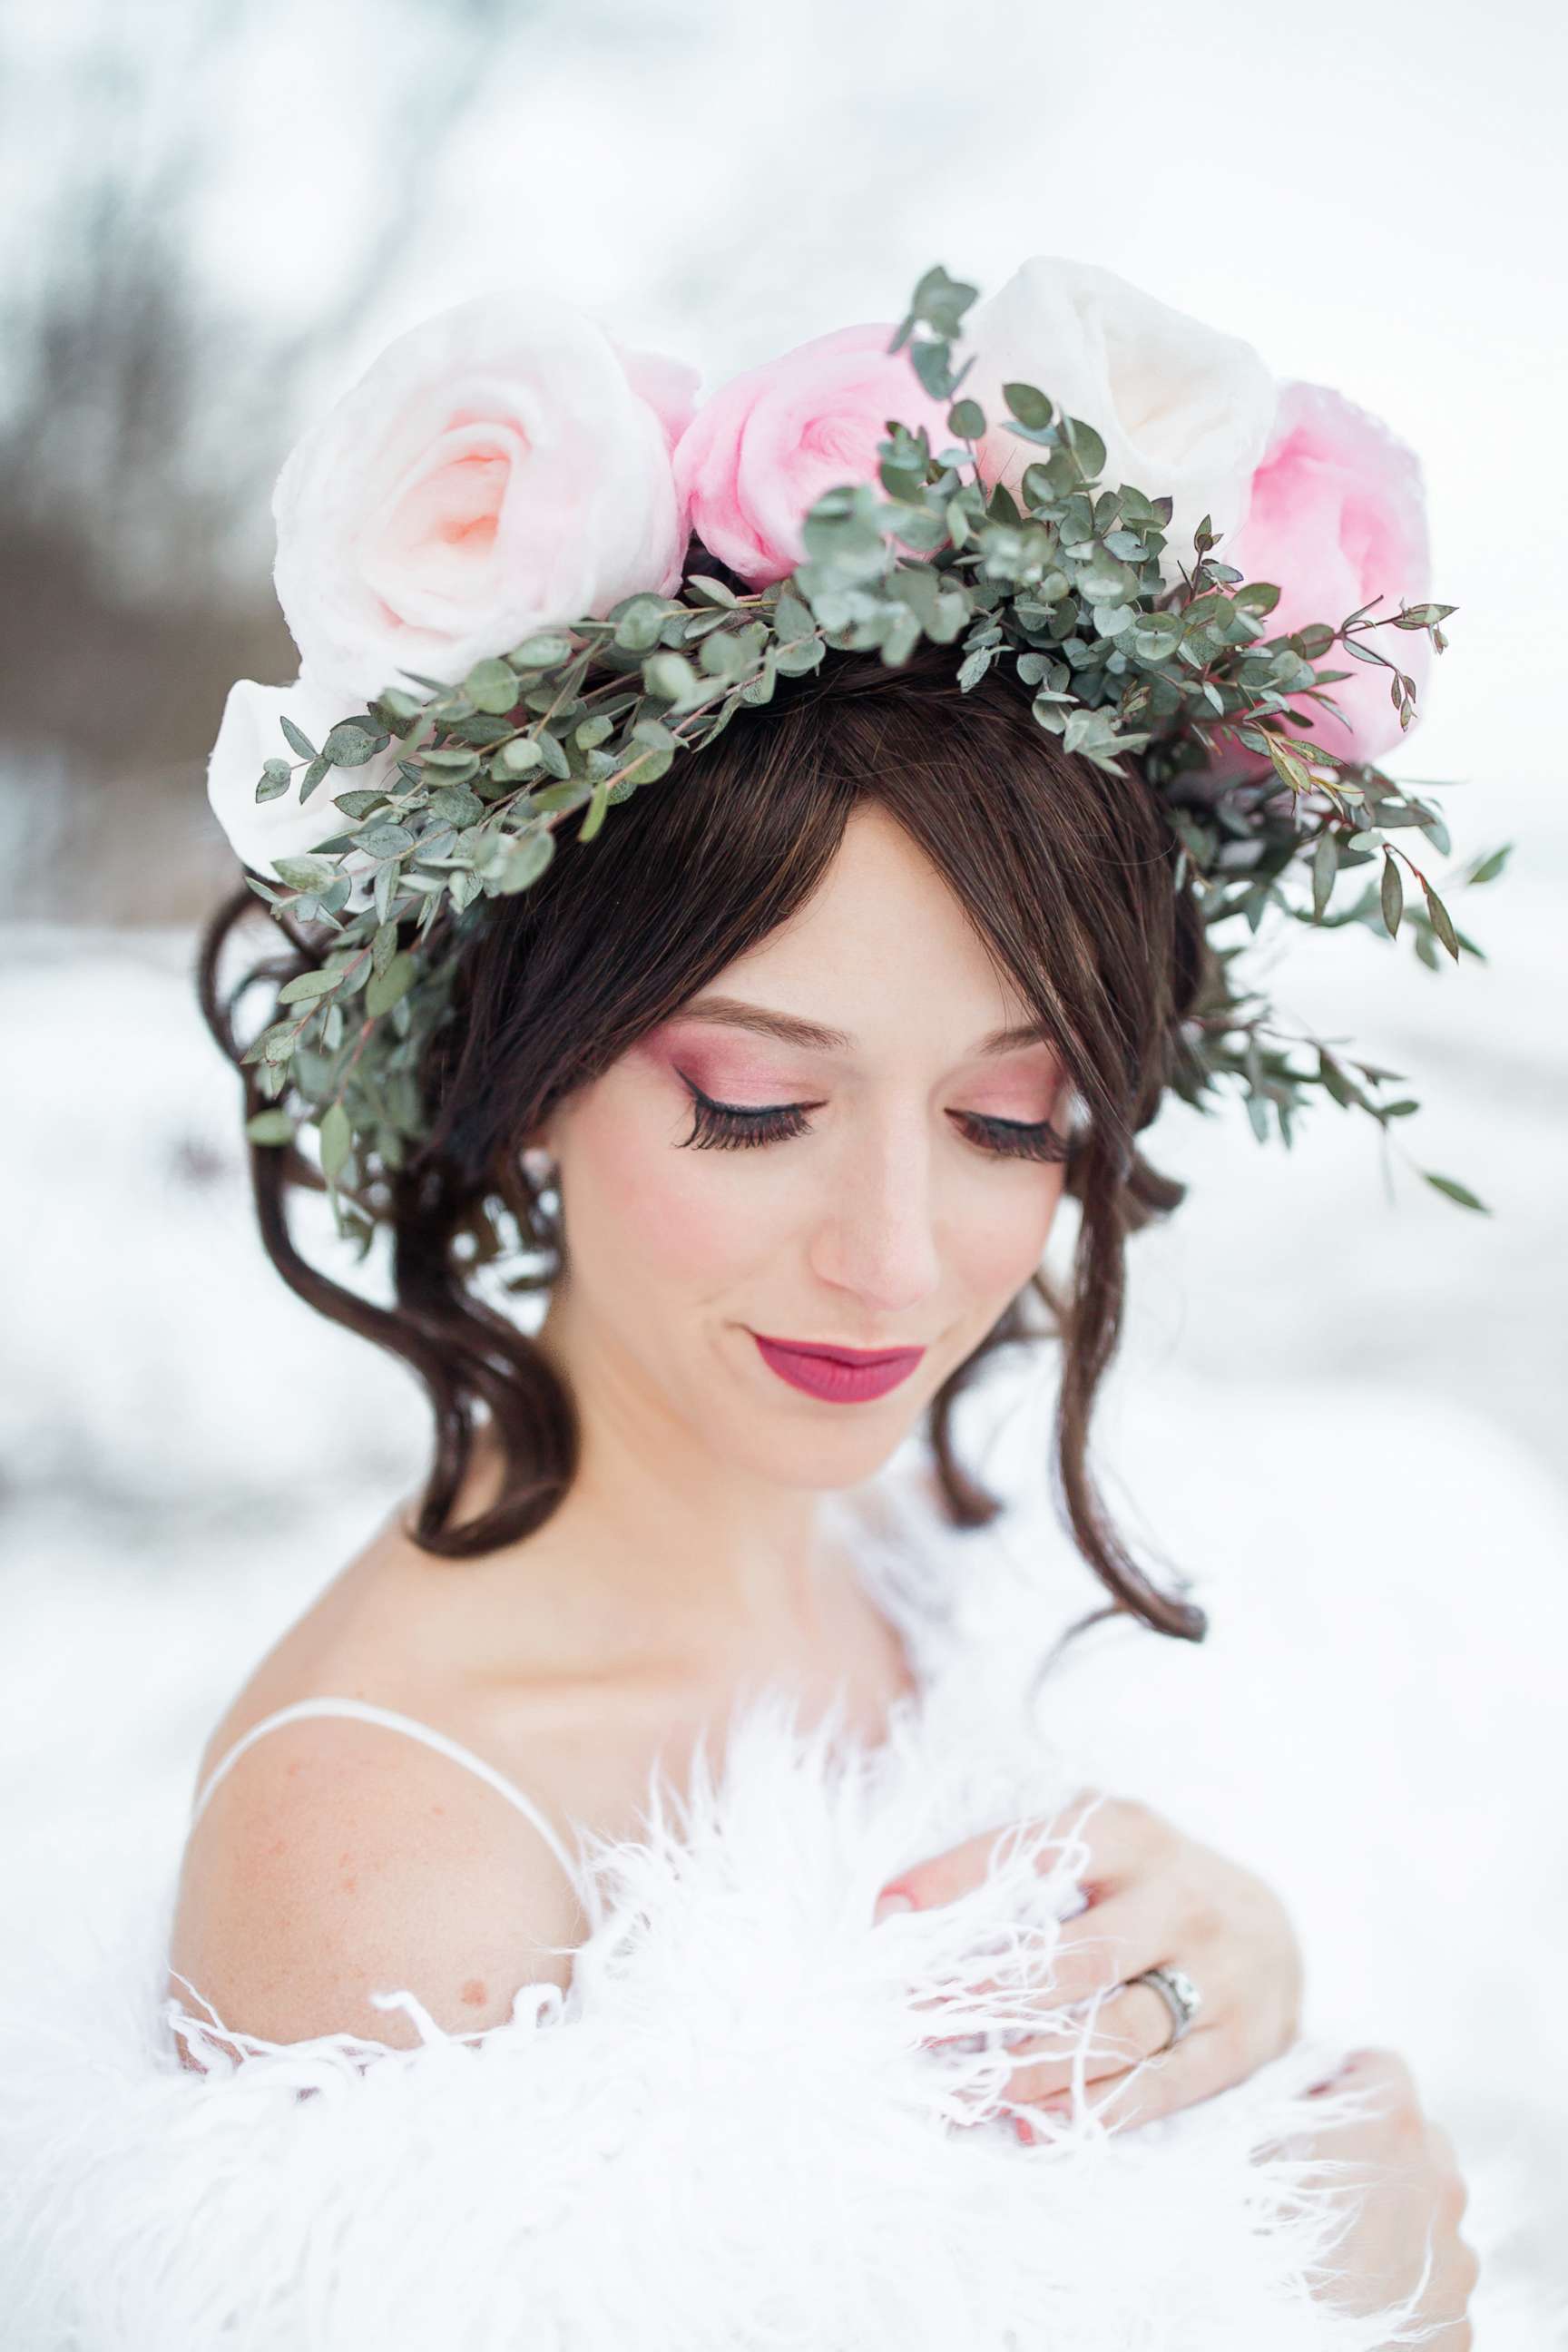 PHOTO: A model displays a flower crown crafted from cotton candy in a wedding-style photo shoot by Milwaukee-based wedding photographer Lottie Lillian.